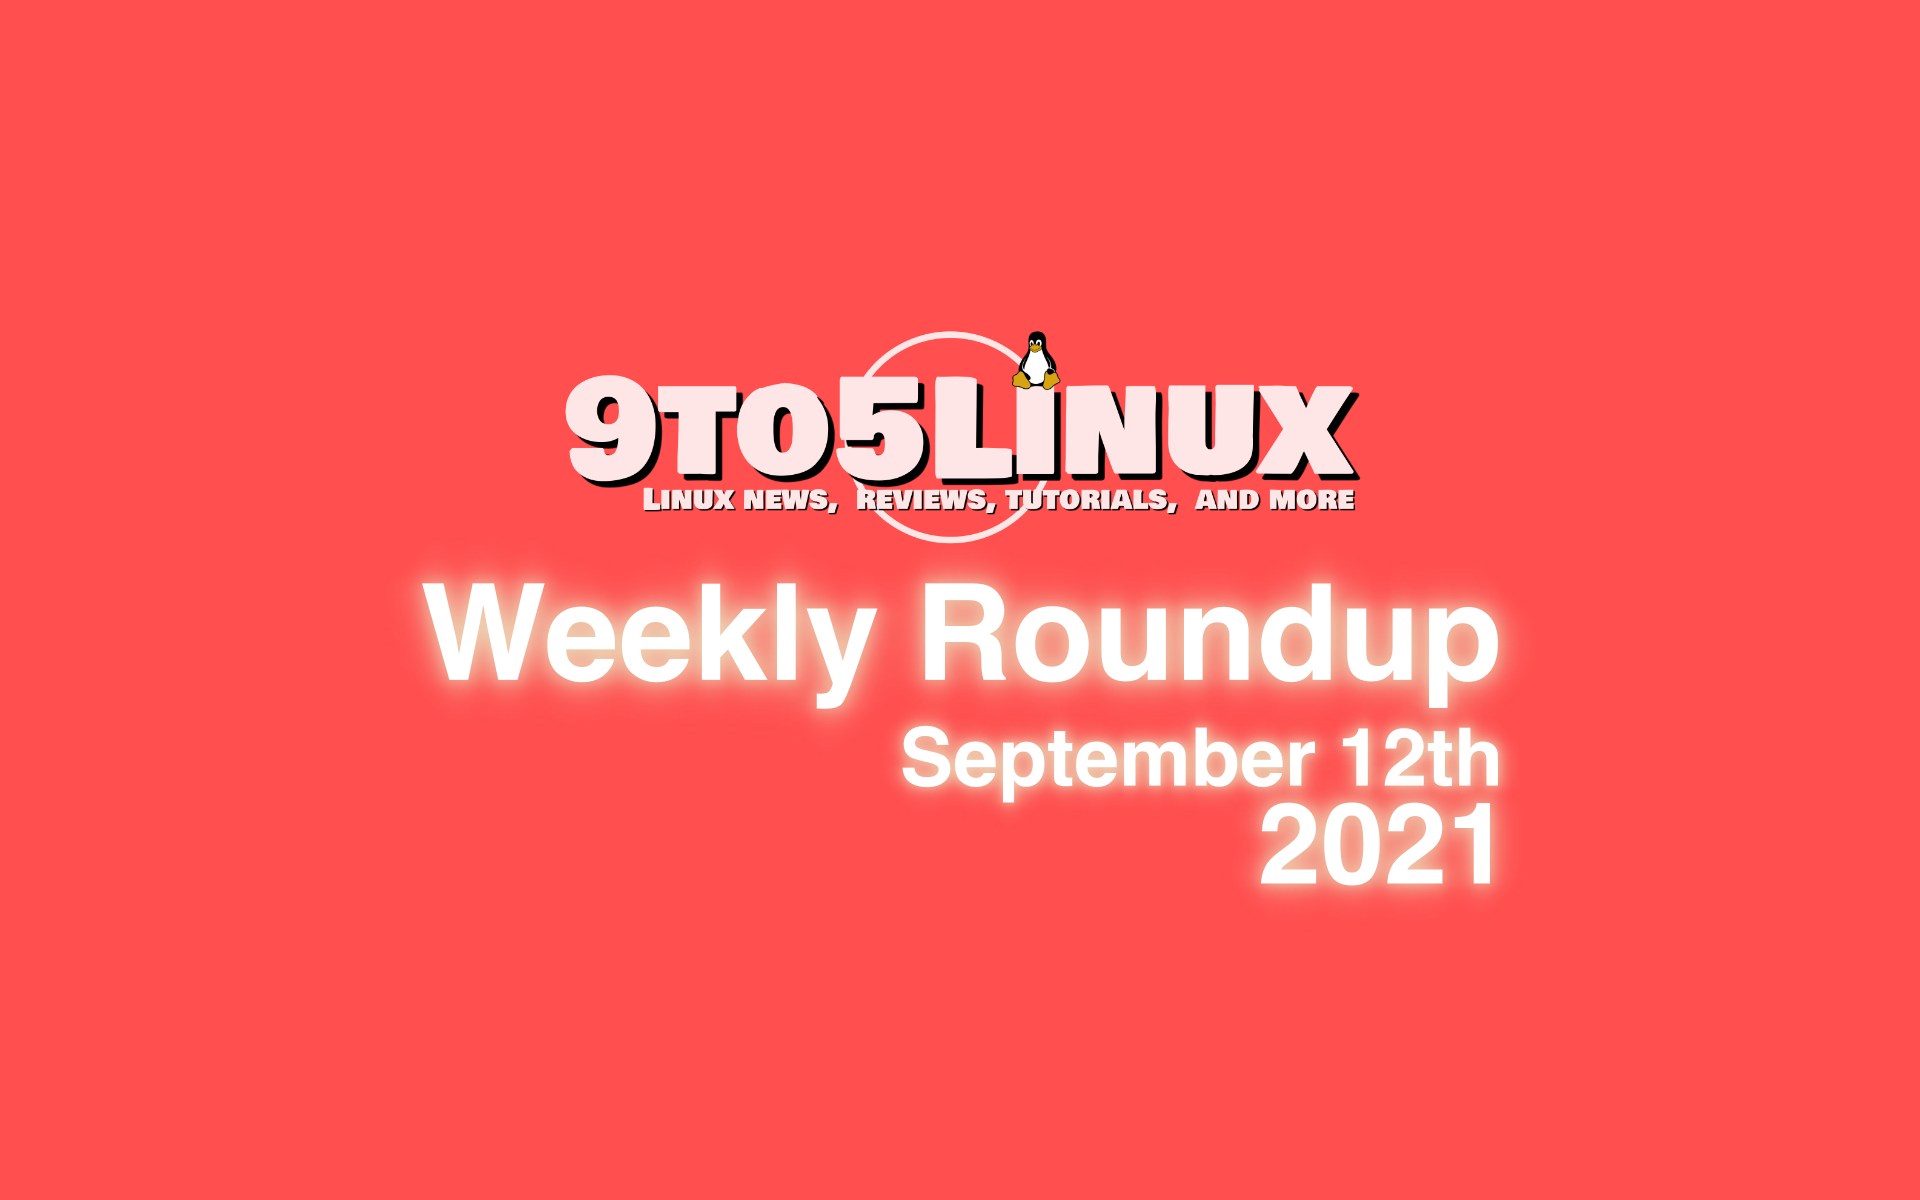 9to5Linux Weekly Roundup: September 12th, 2021